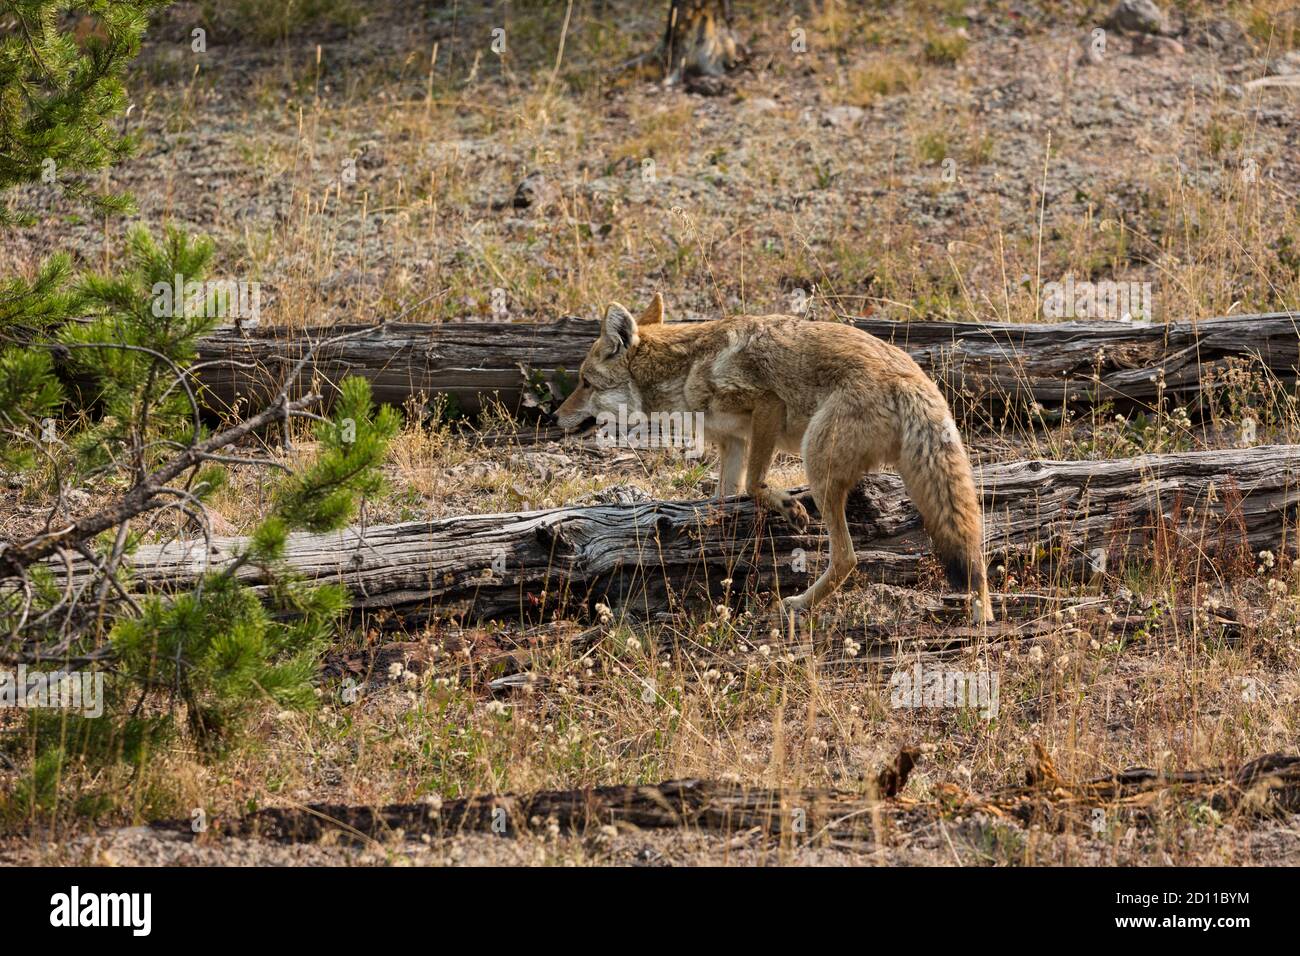 A coyote, Canis latrans, in Yellowstone National Park in Wyoming. Stock Photo